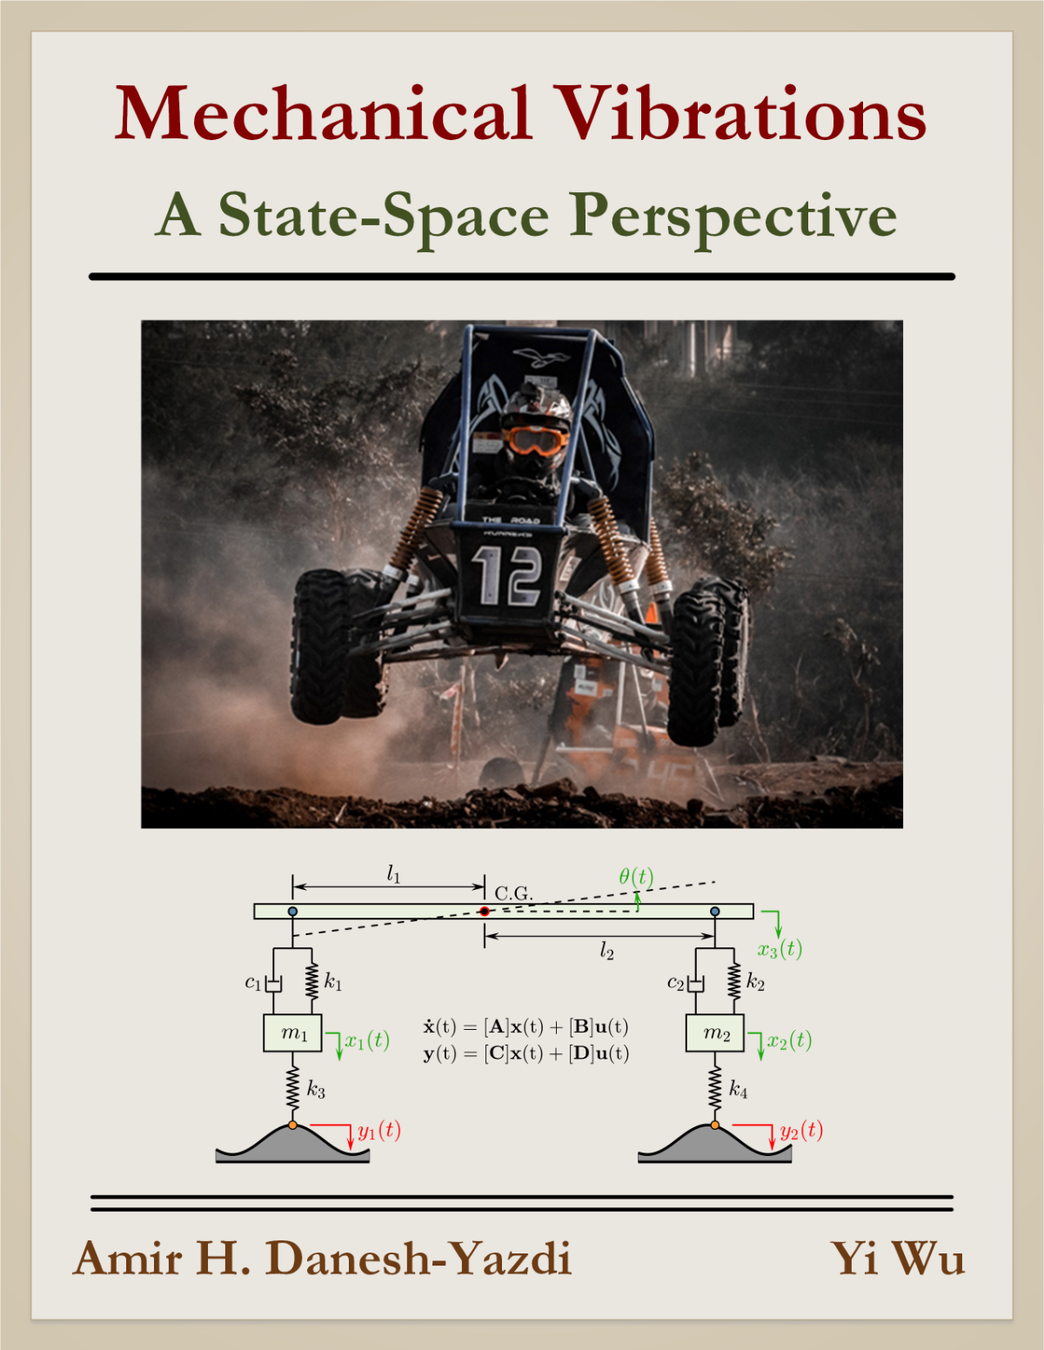 Mechanical Vibrations: A State-Space Perspective cover photo